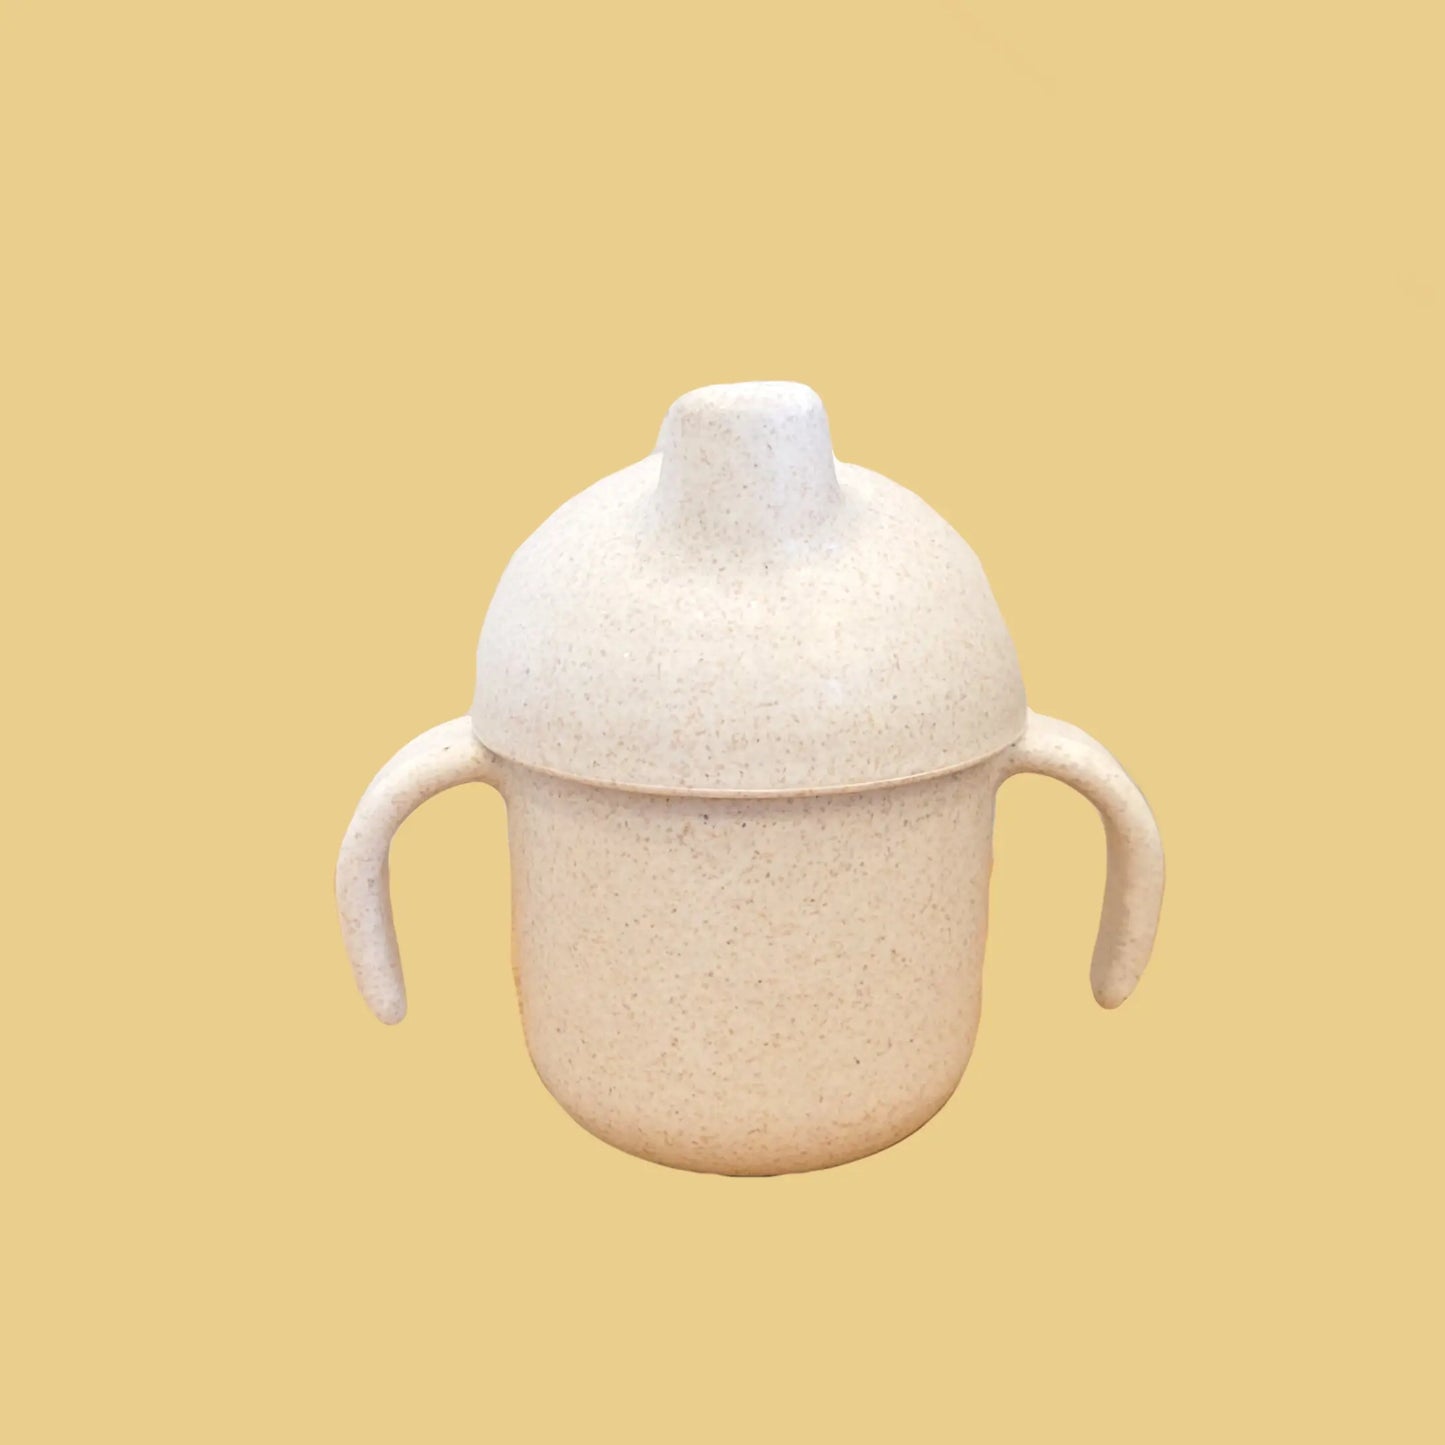 Minito & Co | Sippy Cup made of Wheat Straw, Neutral